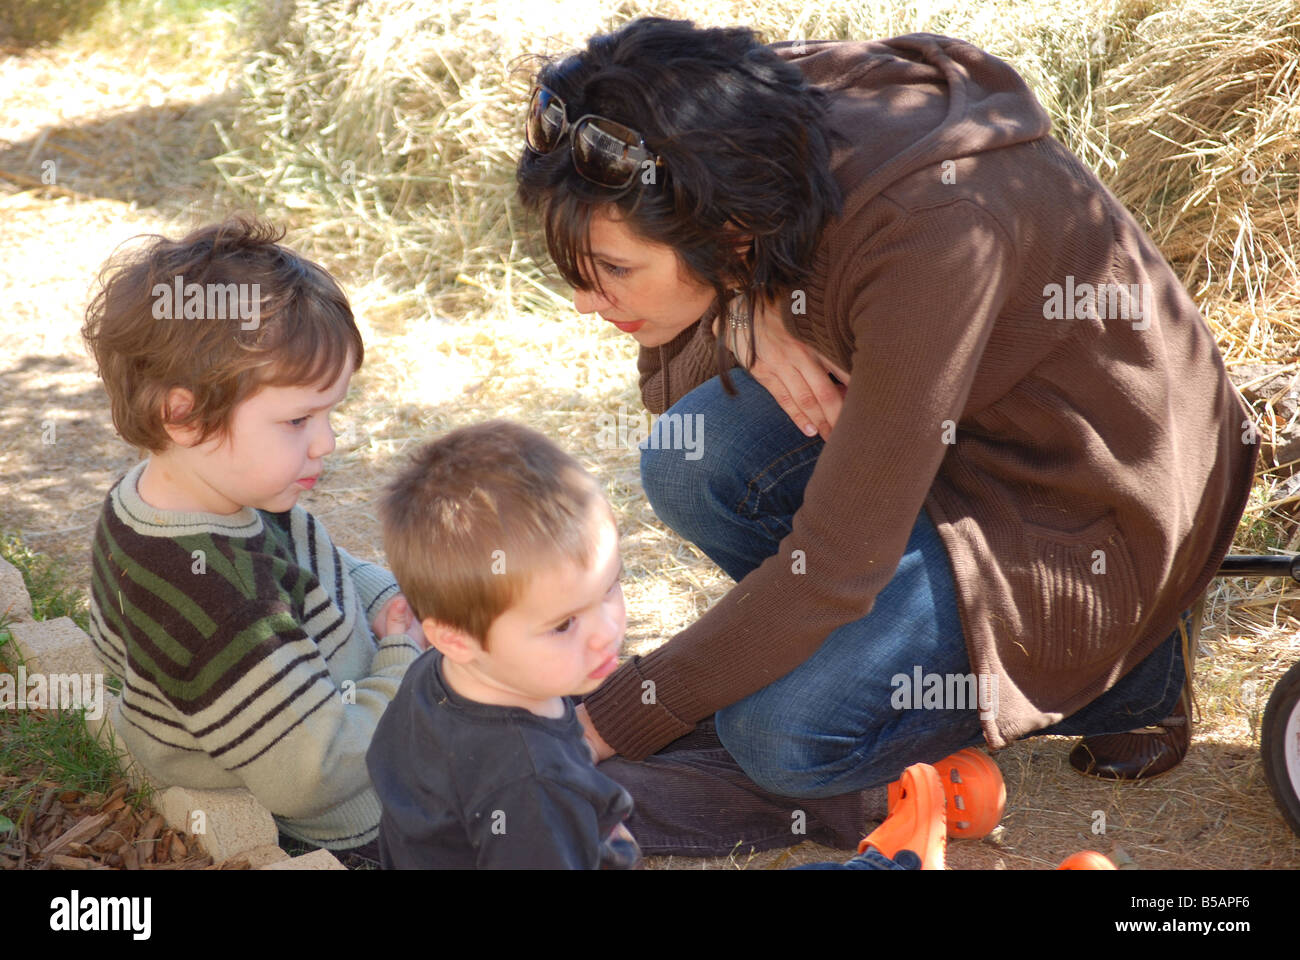 A mother scolding her child Stock Photo